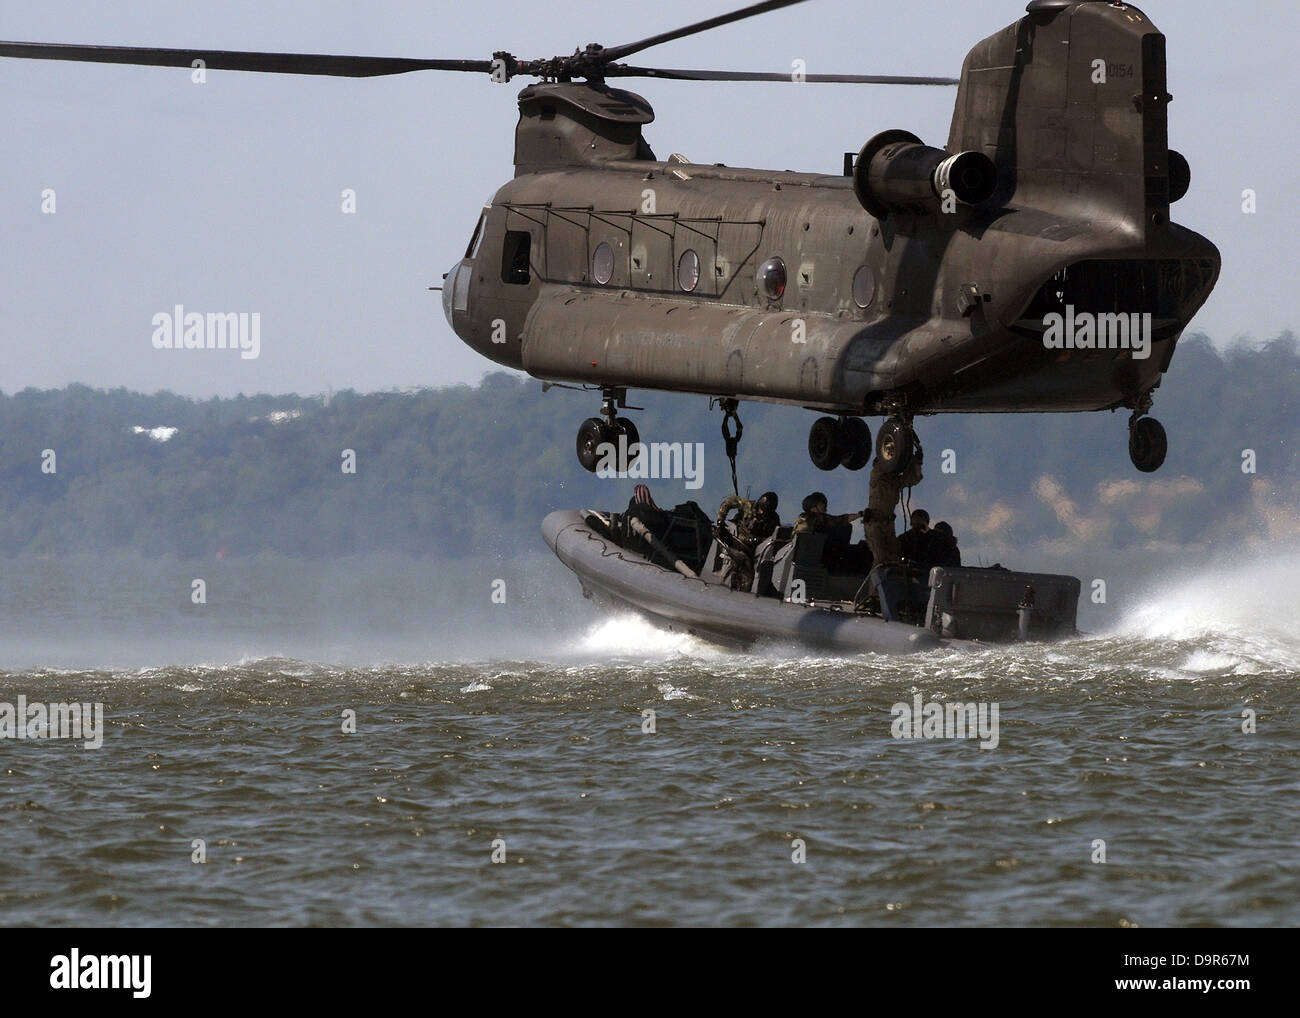 US Navy SEALS in a Special Warfare Combatant-craft attach a naval special warfare 11-meter rigid-hull inflatable boat to an Army CH-47 Chinook helicopter during a training exercise July 16, 2008 at Ft. Eustis, VA. Stock Photo